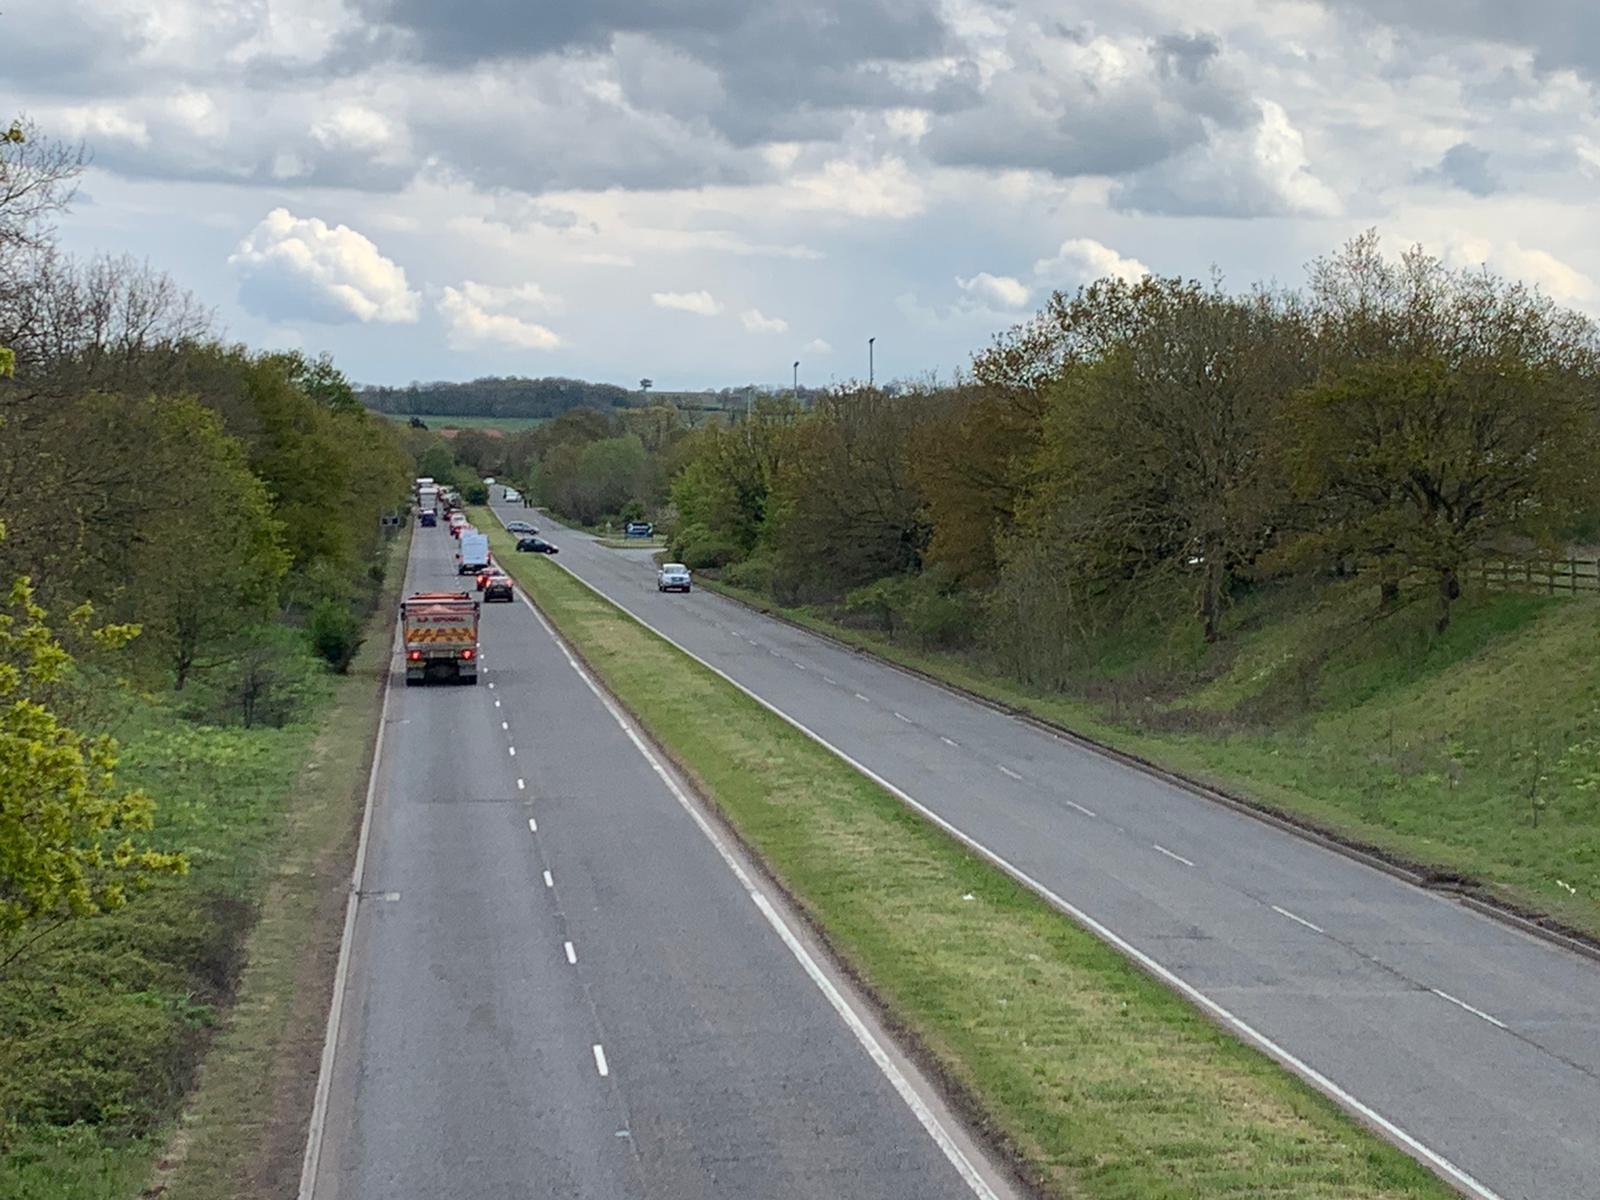 The A1081 dual carriageway. Police officers can be seen in the top right side of the dual carriageway.